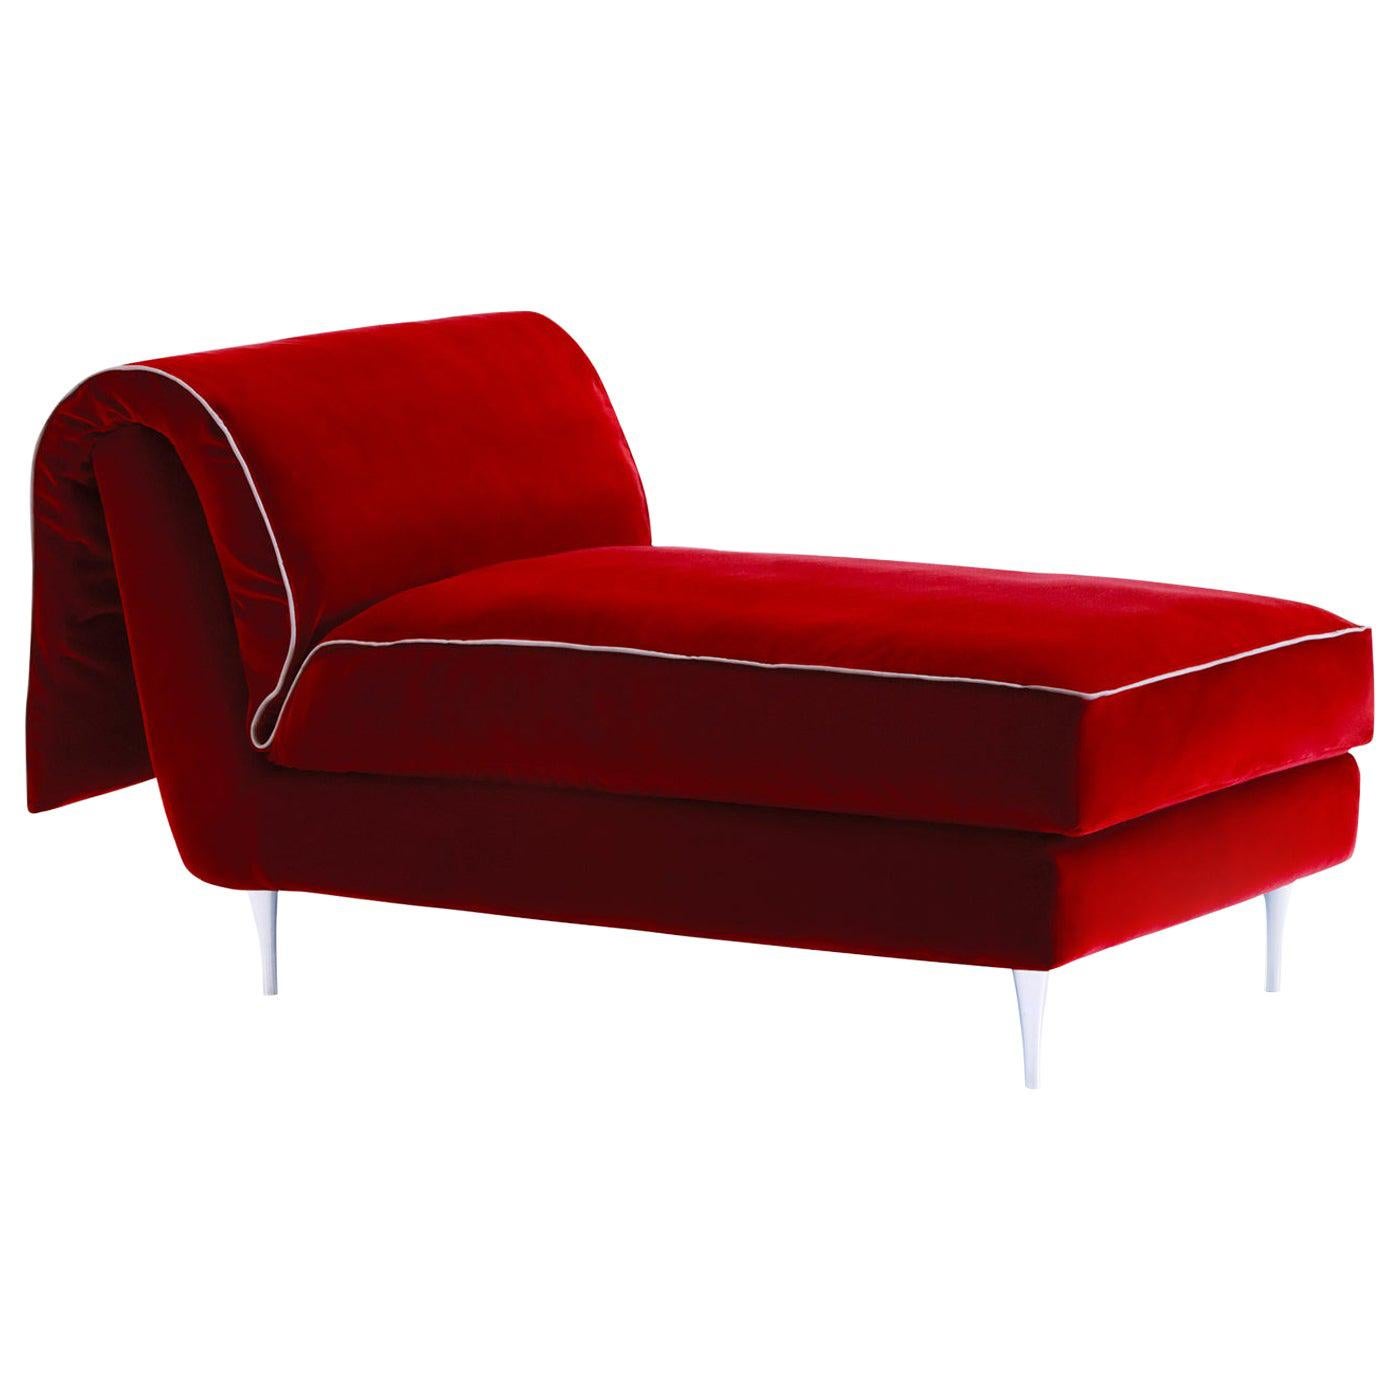 Casquet Chaise Longue by ddpstudio For Sale